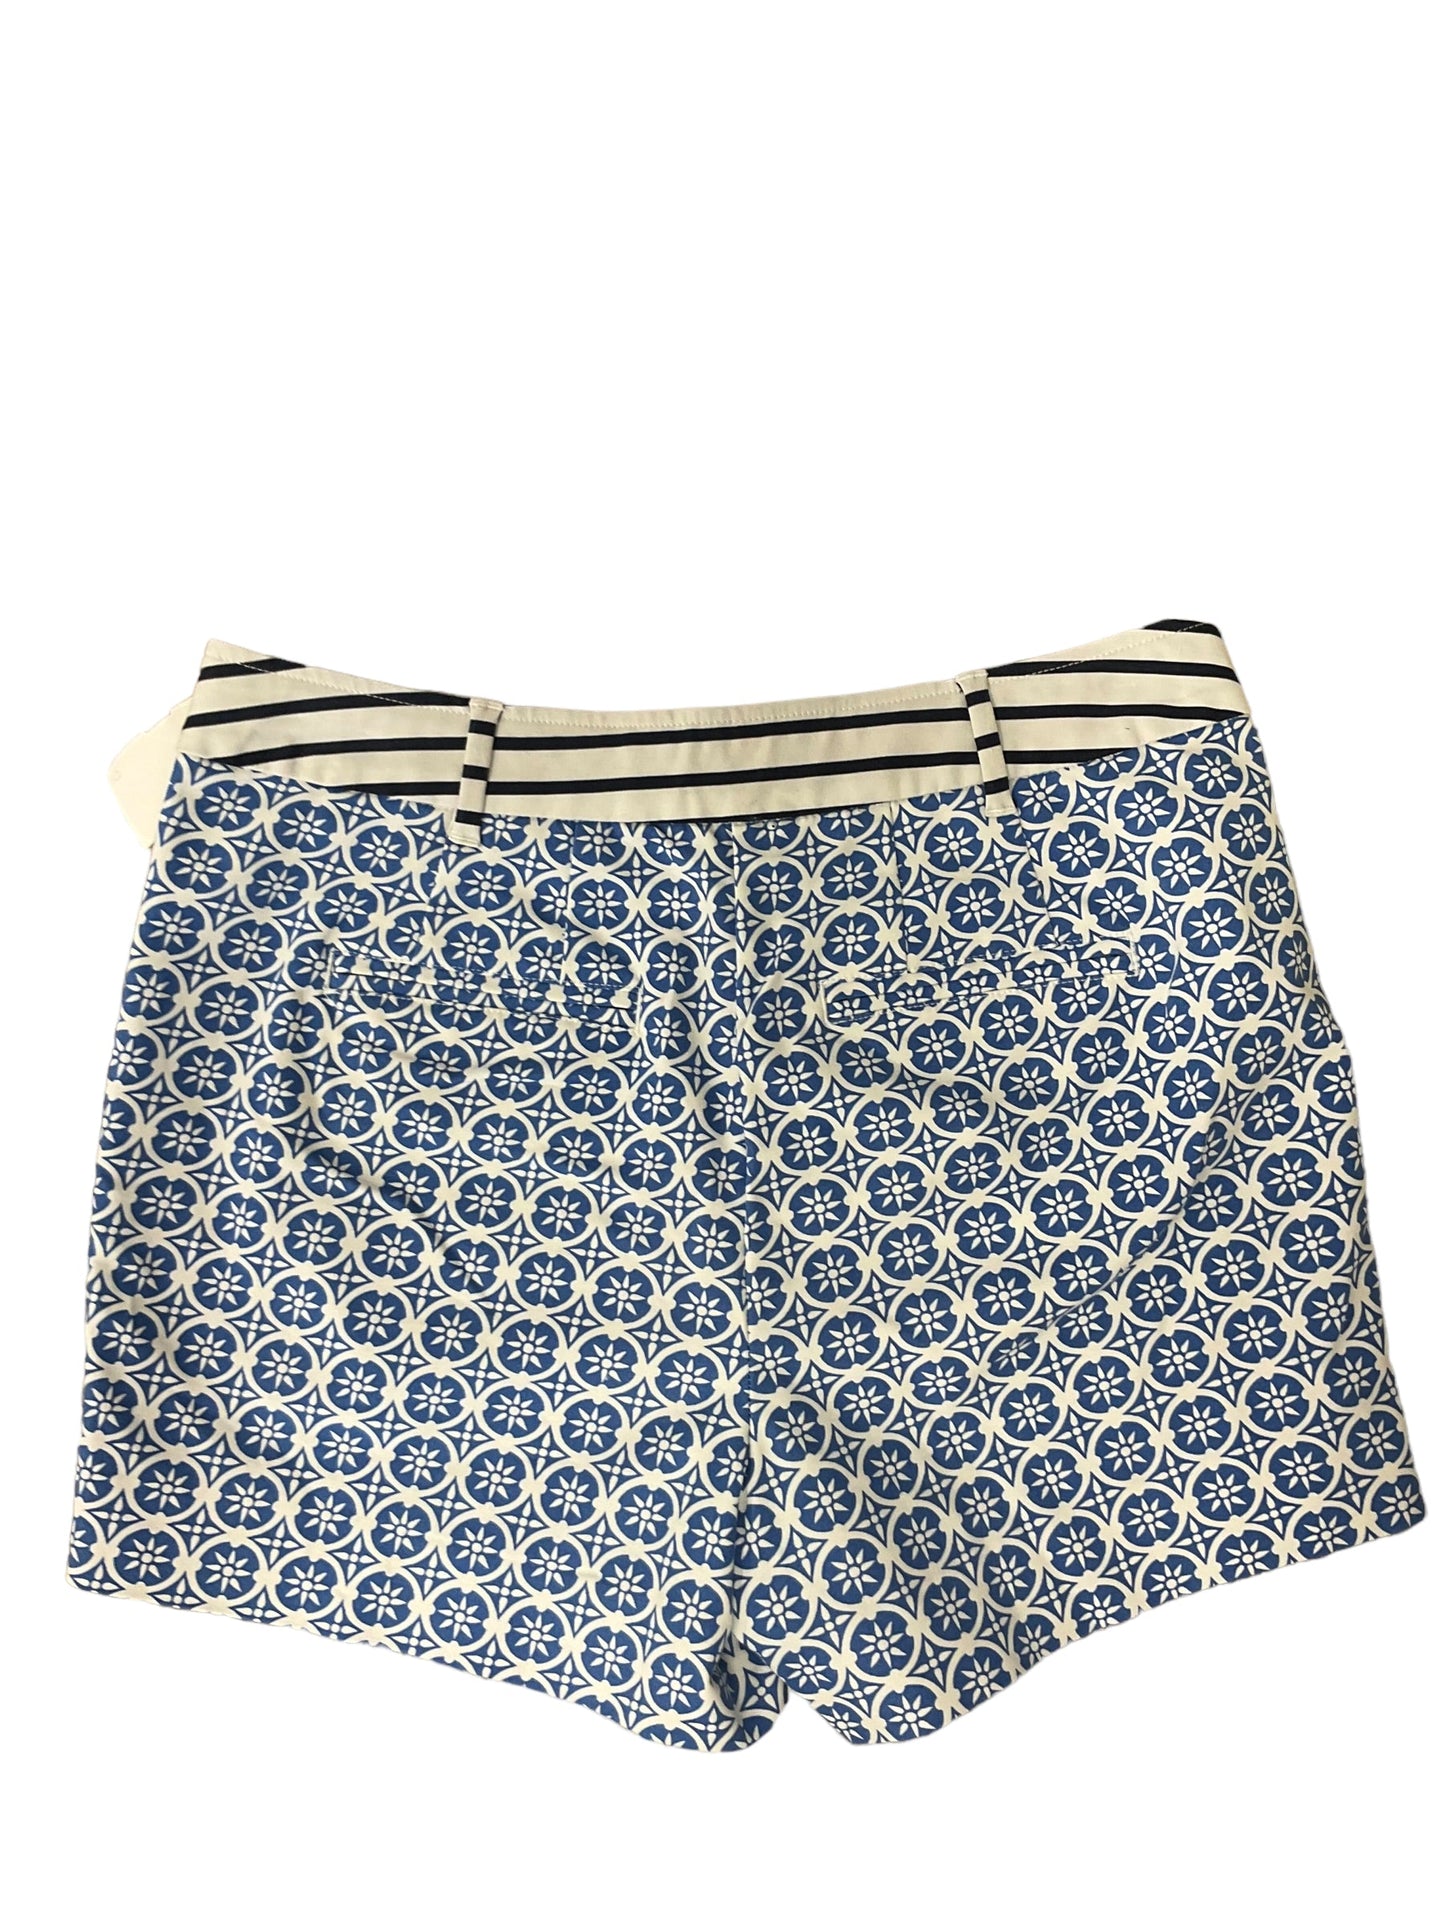 Shorts By Boden  Size: 4